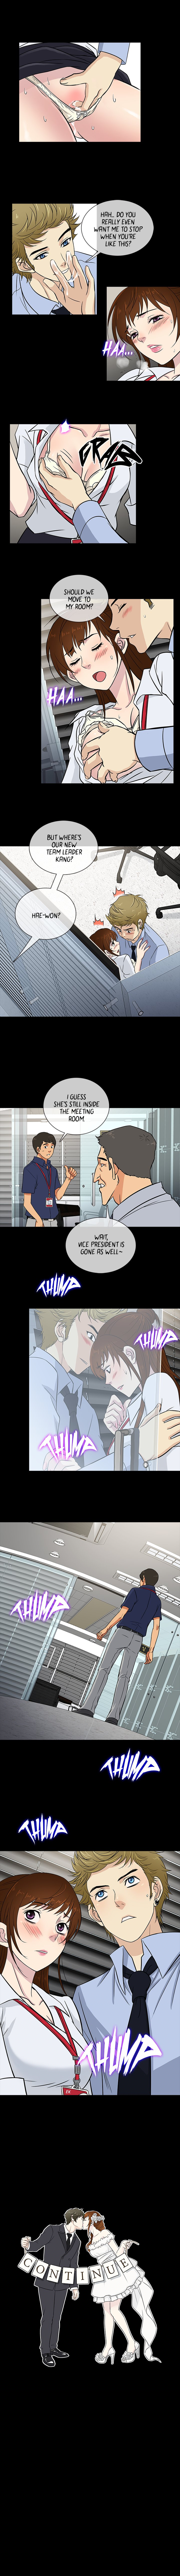 She’s Back - Chapter 20 Page 7